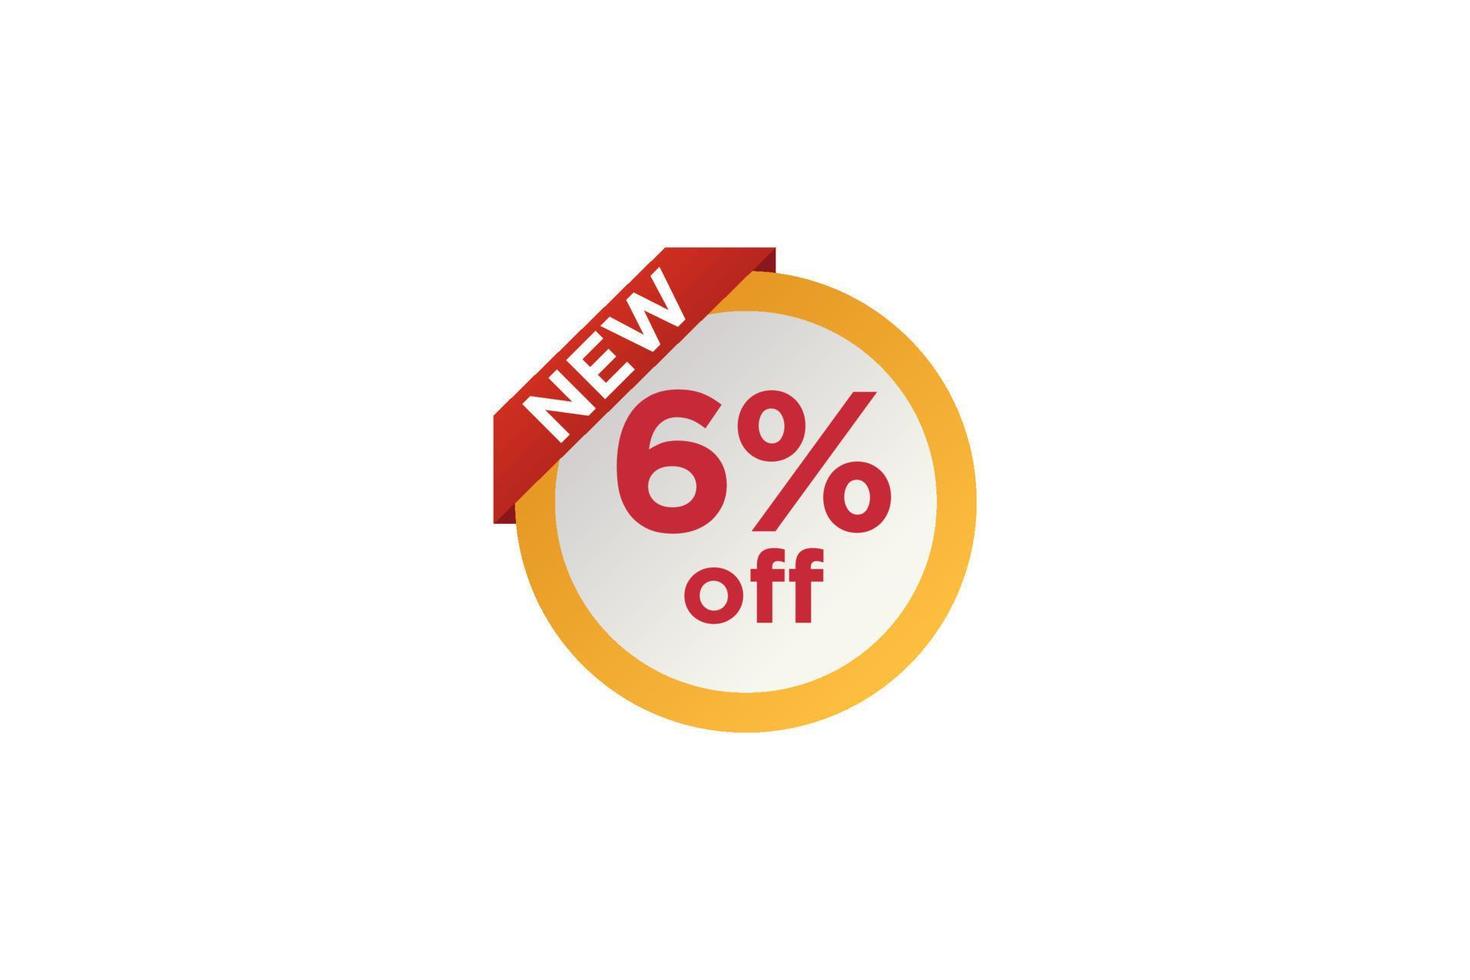 6 discount, Sales Vector badges for Labels, , Stickers, Banners, Tags, Web Stickers, New offer. Discount origami sign banner.